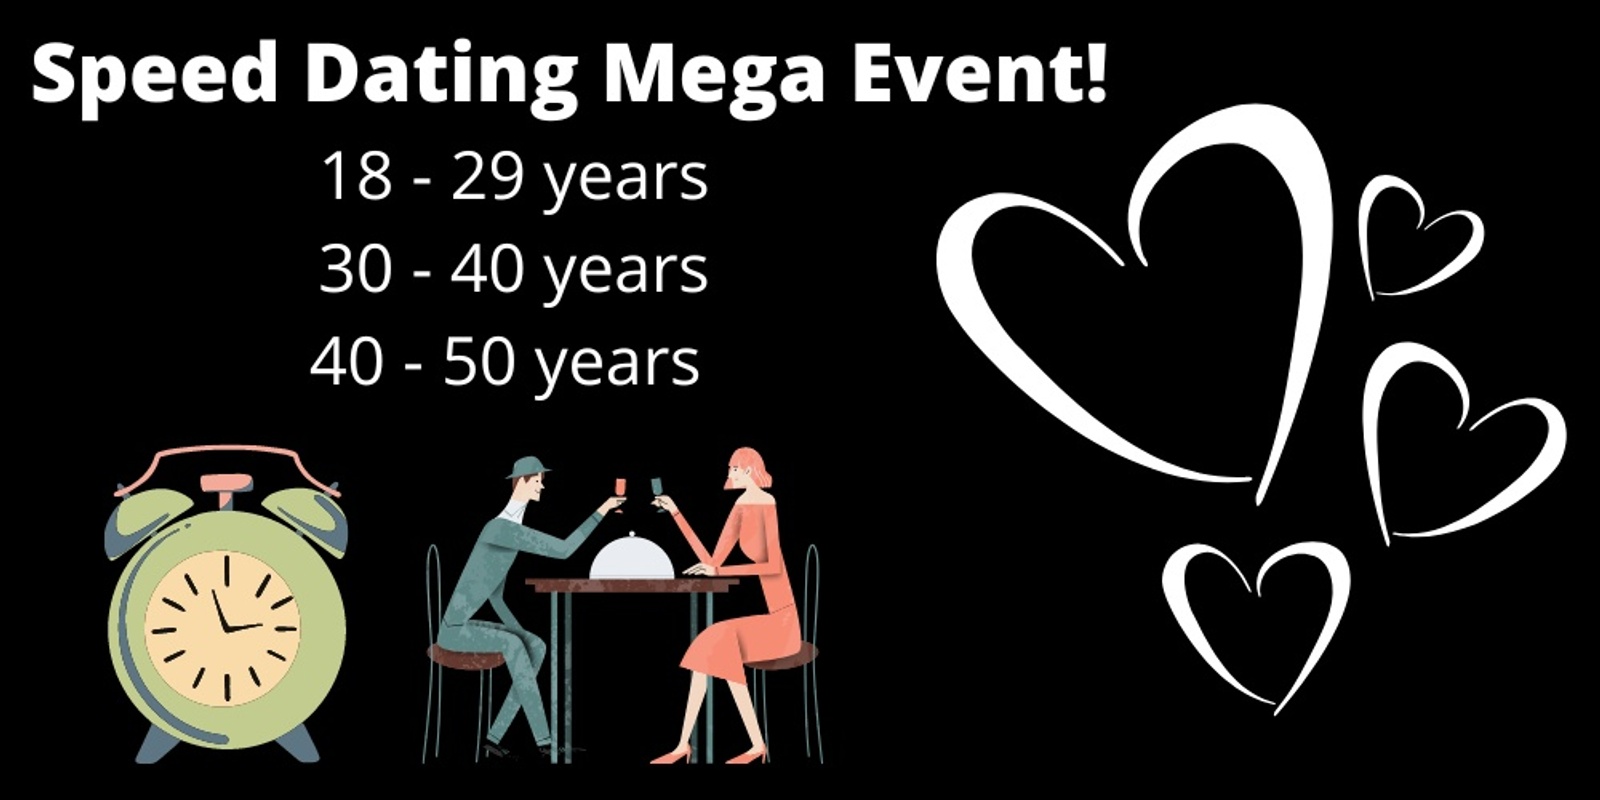 Banner image for Speed Dating Mega Event 18-29 years, 30-40 years, 40-50 years